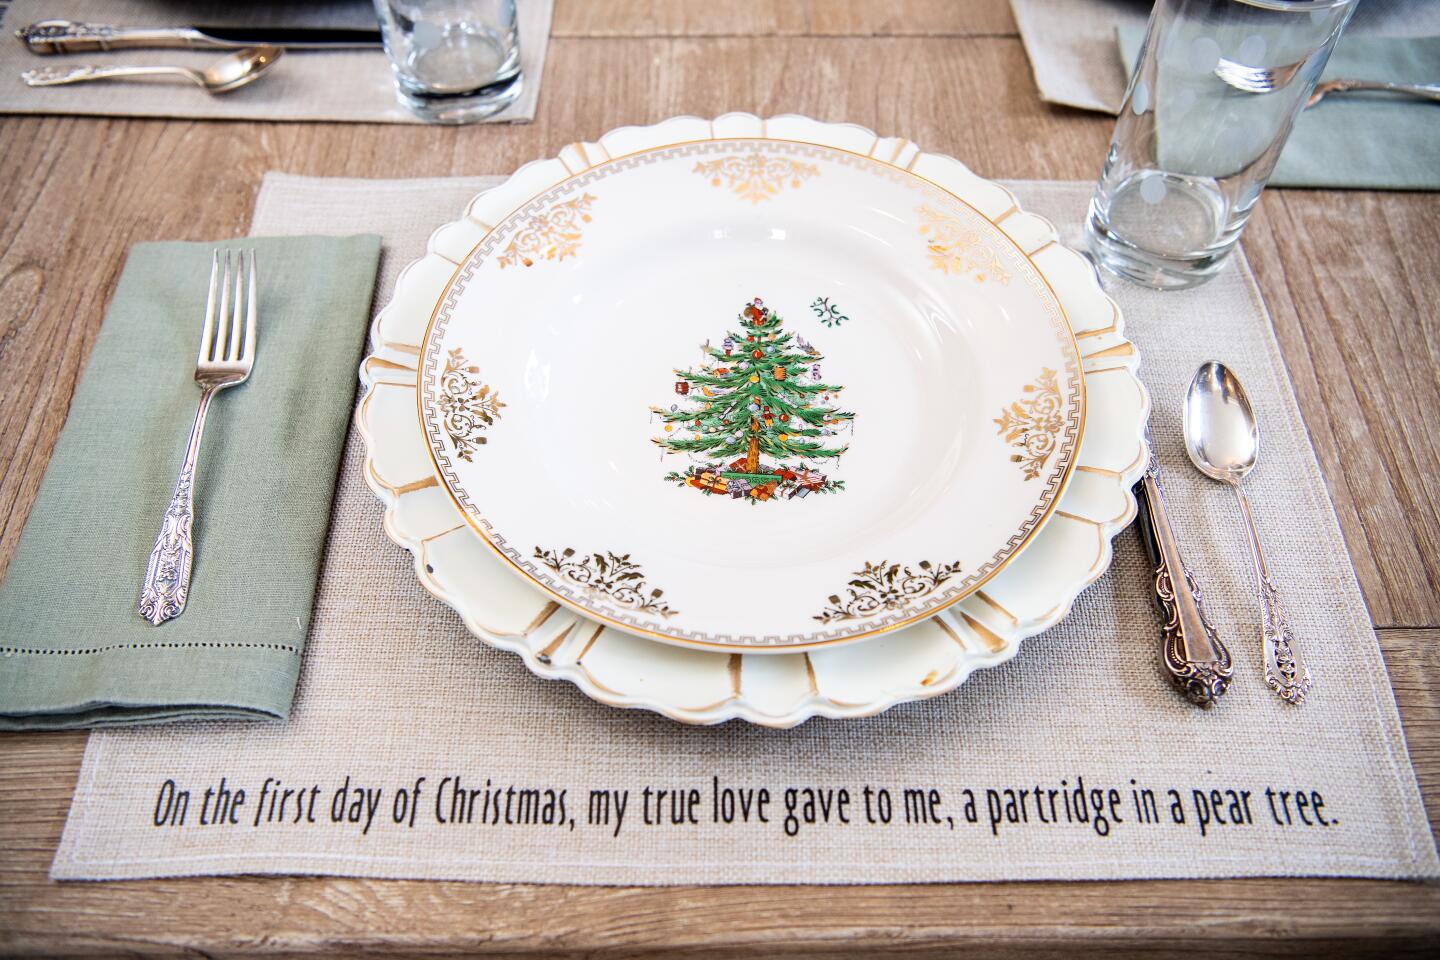 The blogger and DIY guru created the place mats, which include verses from holiday carols.